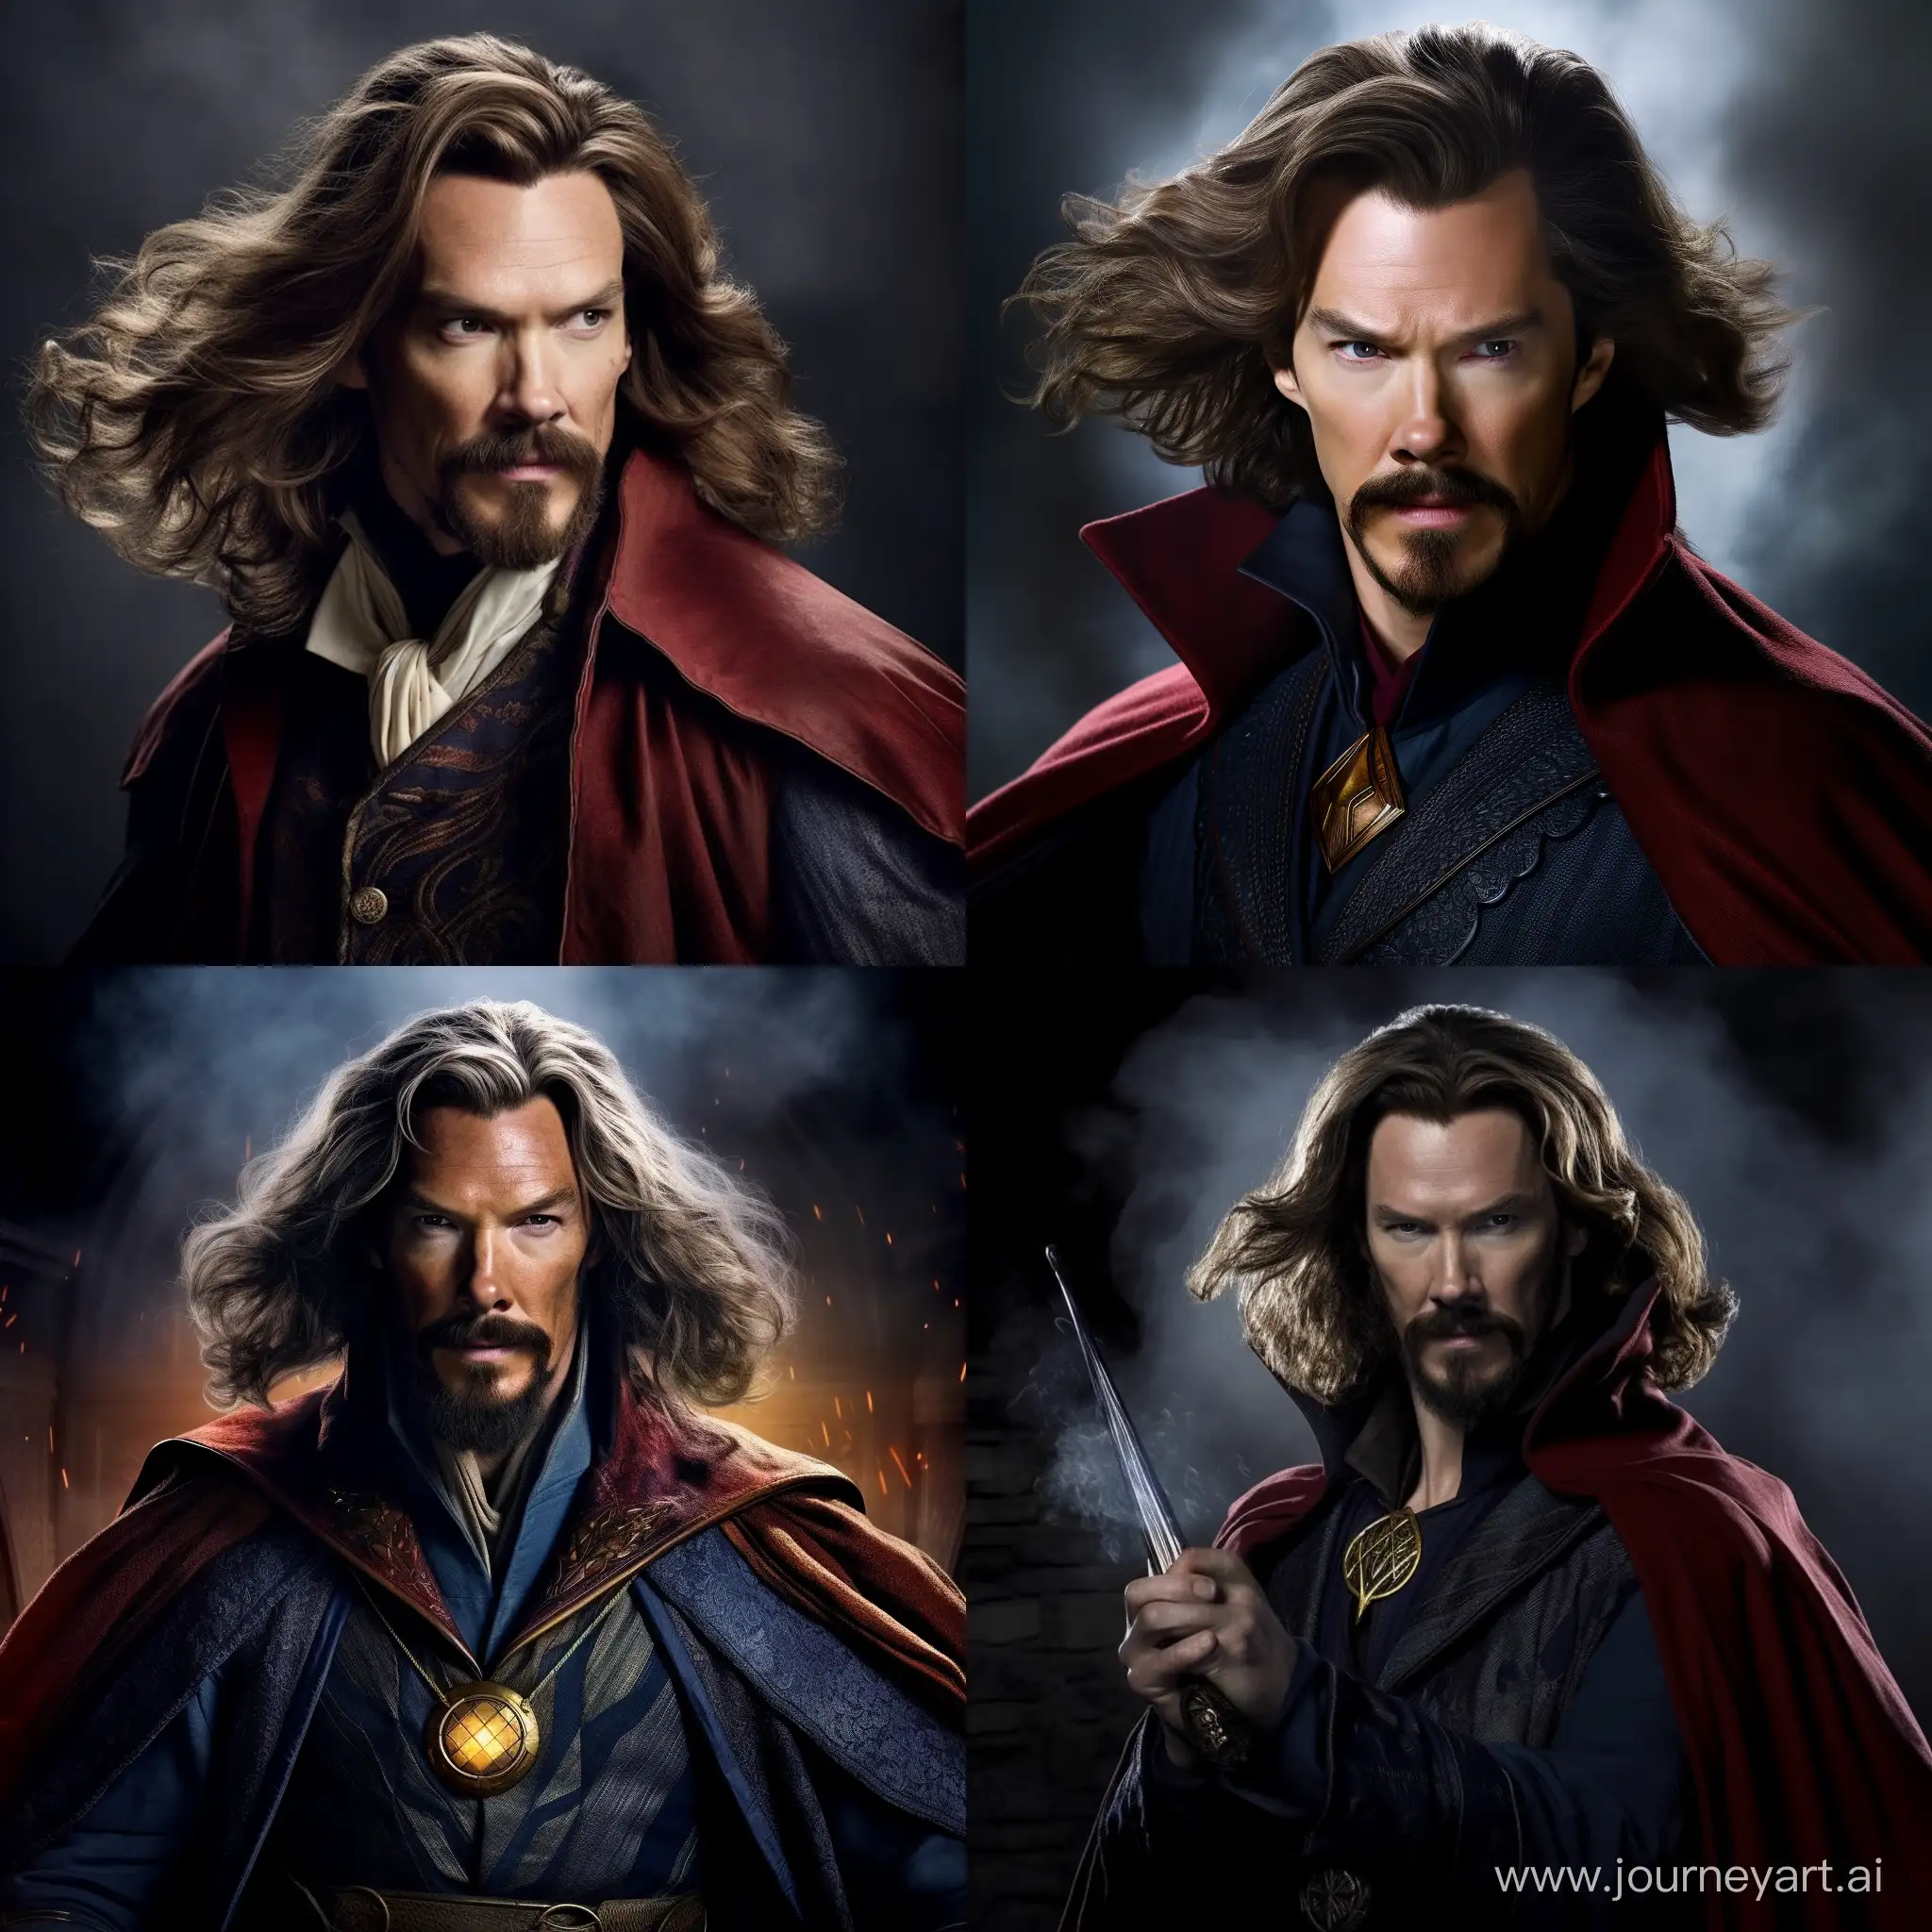 Benedict-Cumberbatch-Embraces-Doctor-Strange-Persona-with-Long-Wavy-Hair-and-Goatee